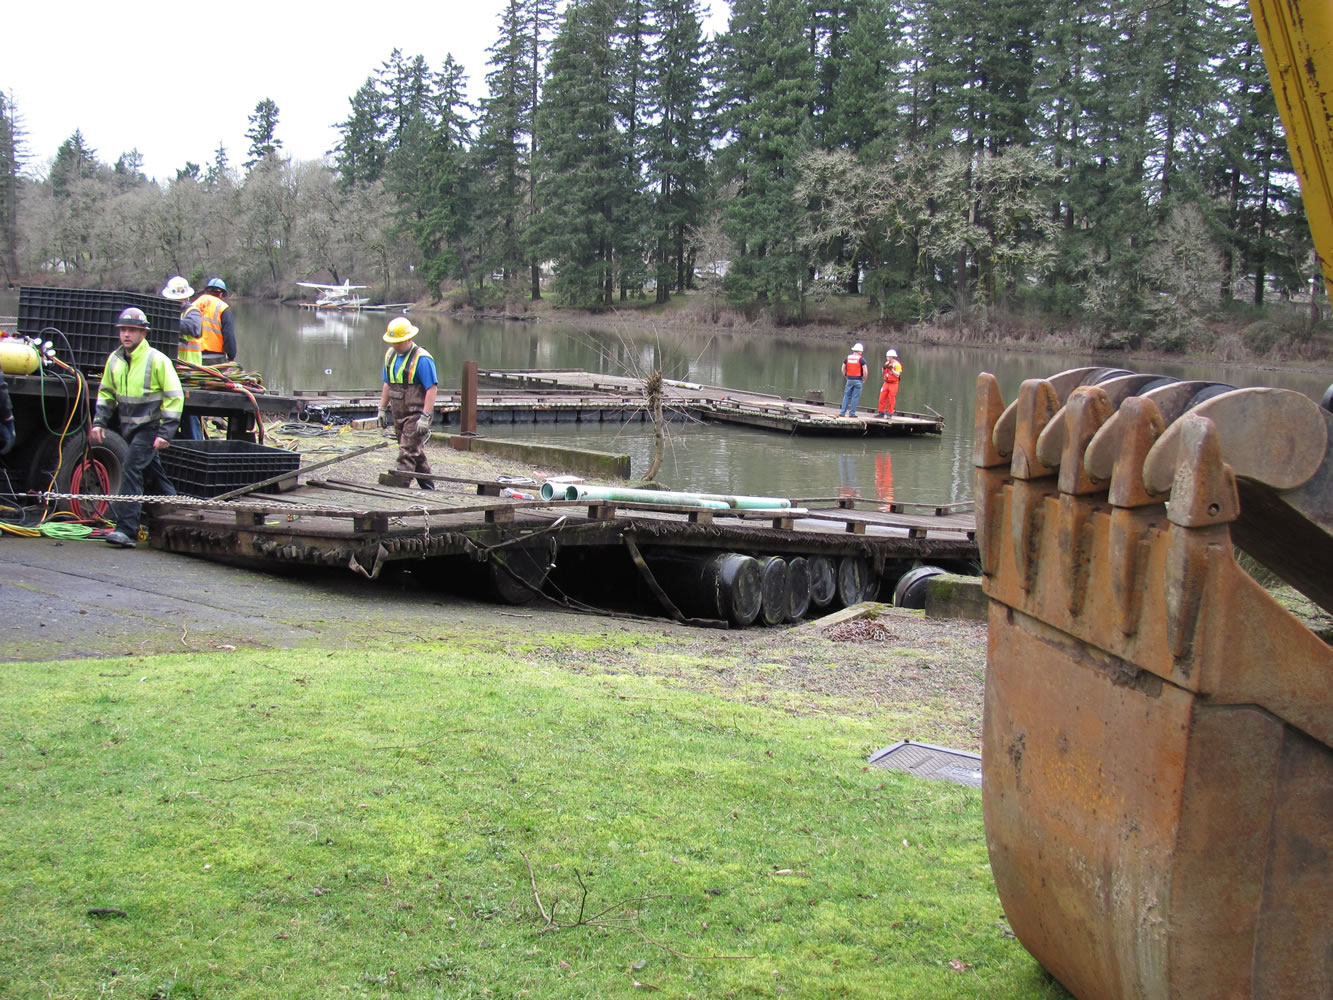 Crews from the City of Camas and Ballard Diving and Salvage work to pull a section of old dock from Lacamas Lake at the site of the former Moose Lodge on Friday. The wood and other debris were hauled away from the property yesterday for disposal. Four large logs, 6 to 7 feet in diameter, which were used as supports underneath the dock, were discovered.